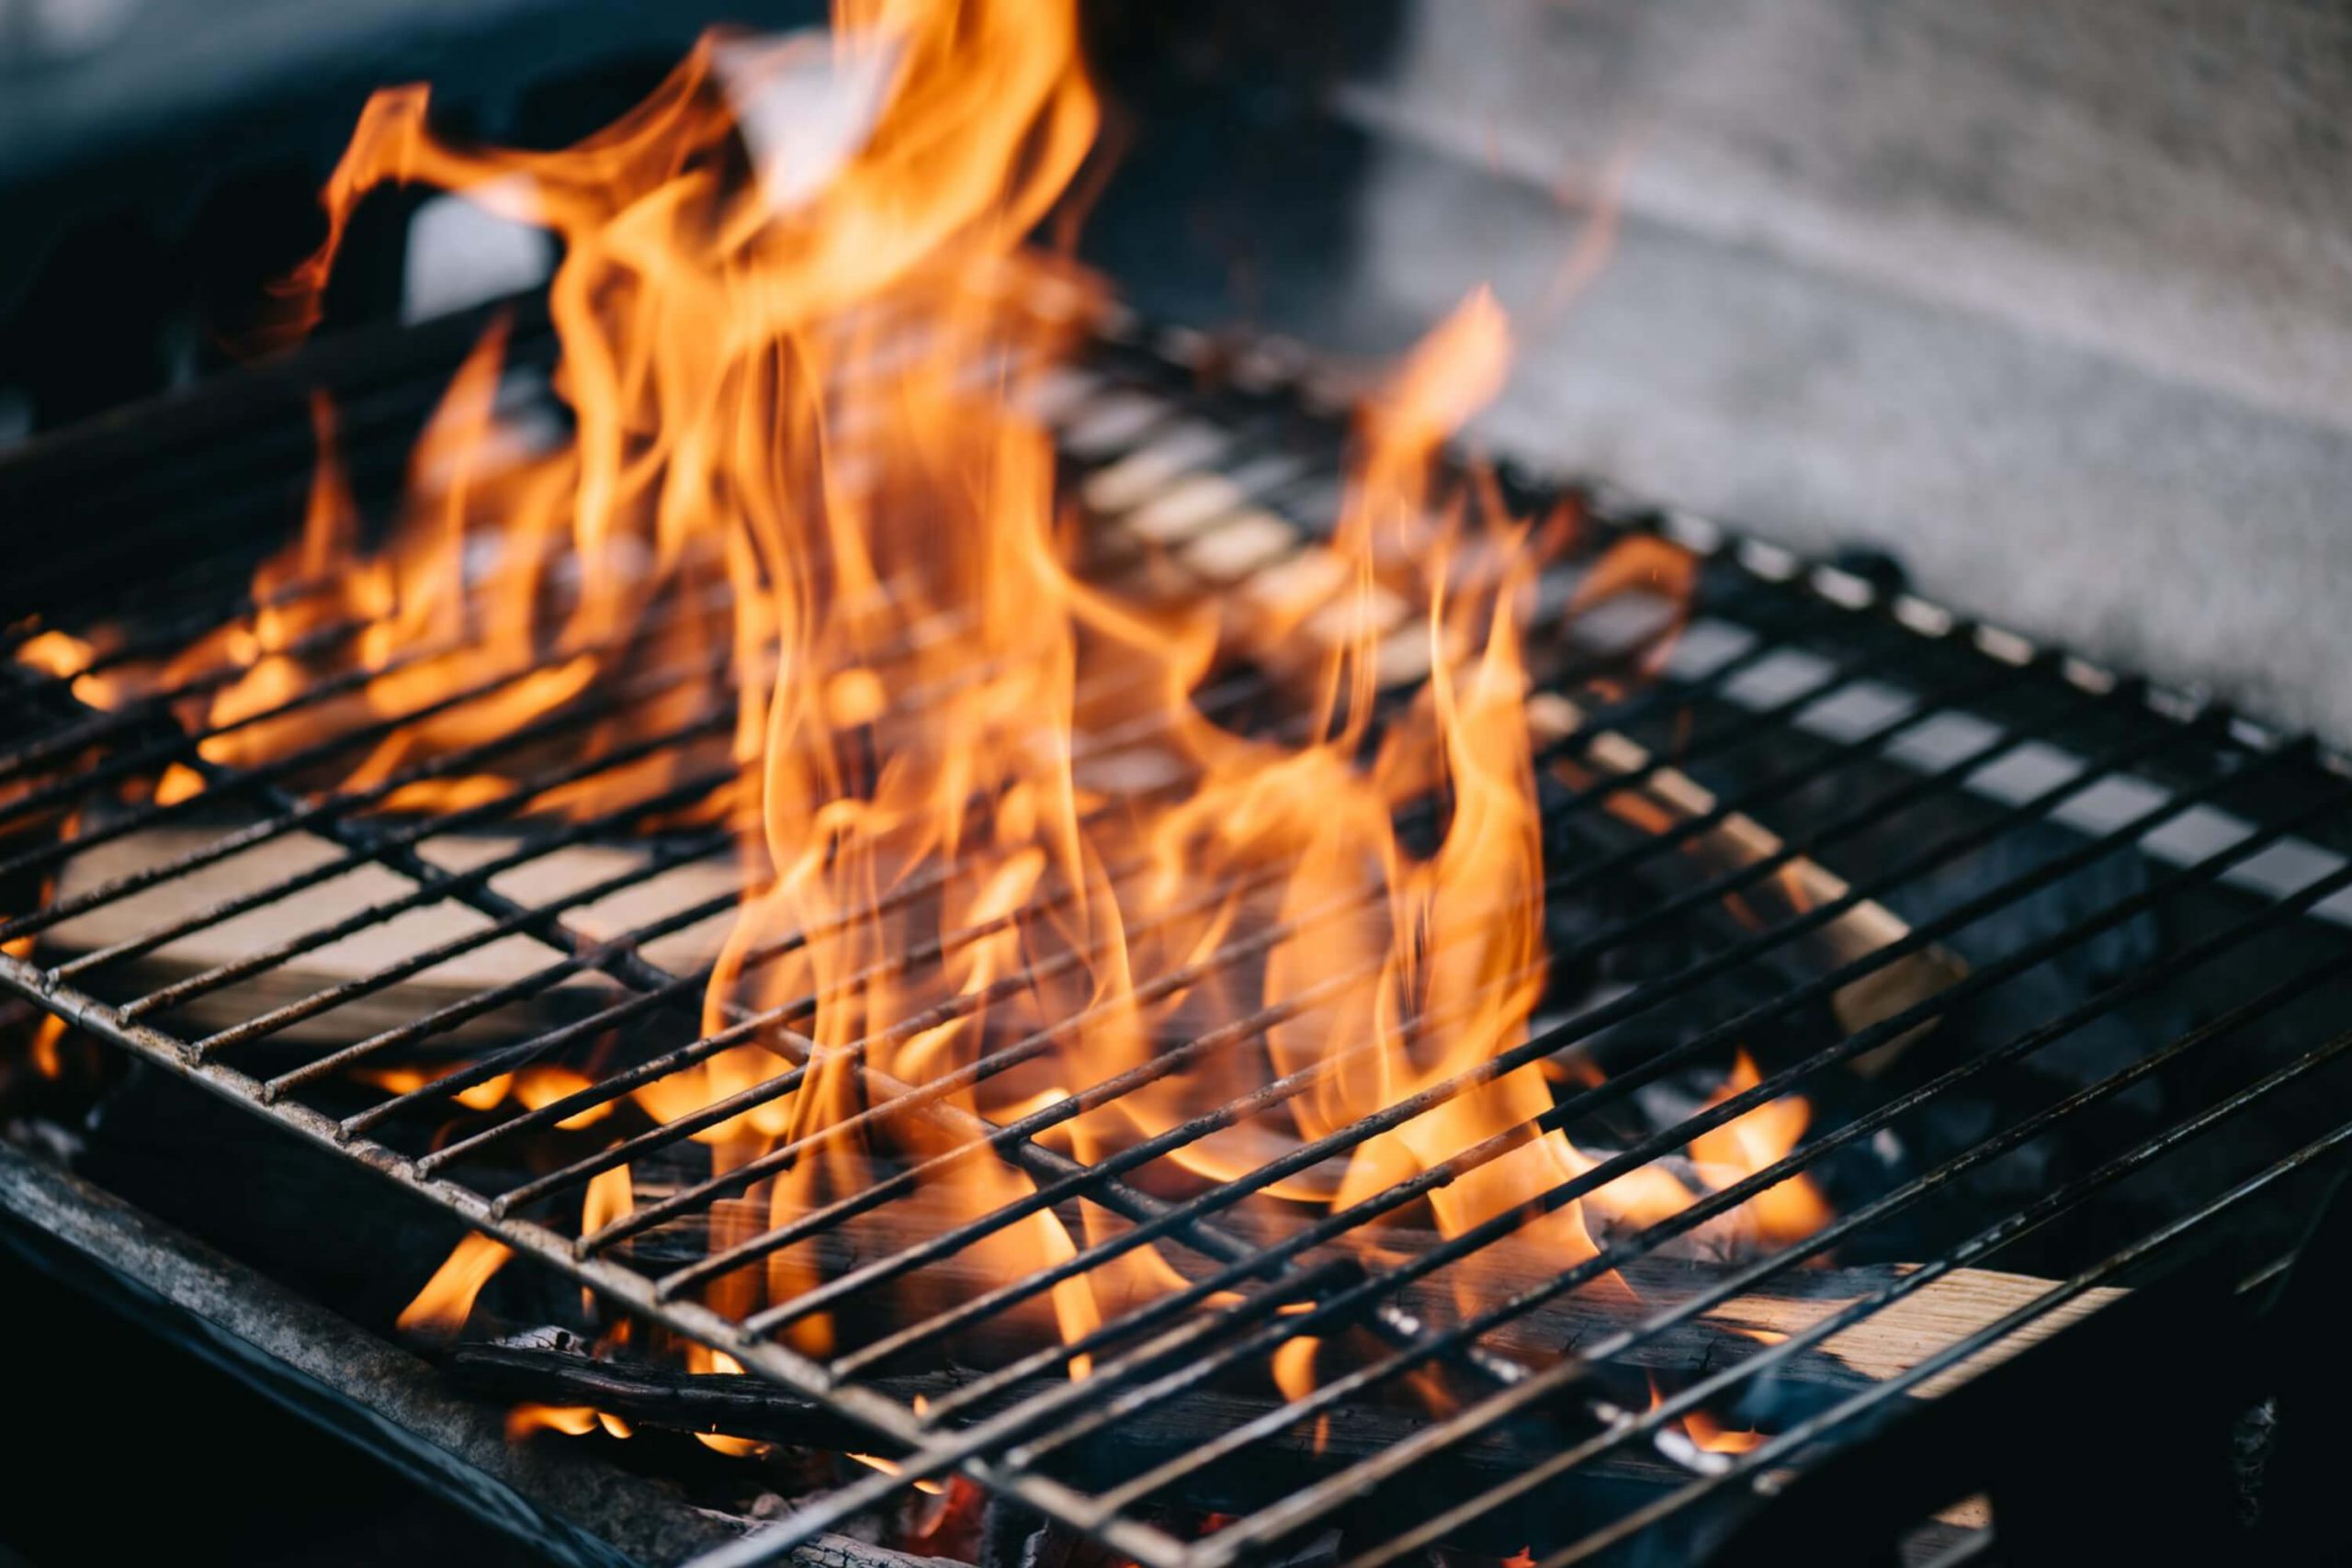 Your Grill Is Plugged Into a Bad Power Source